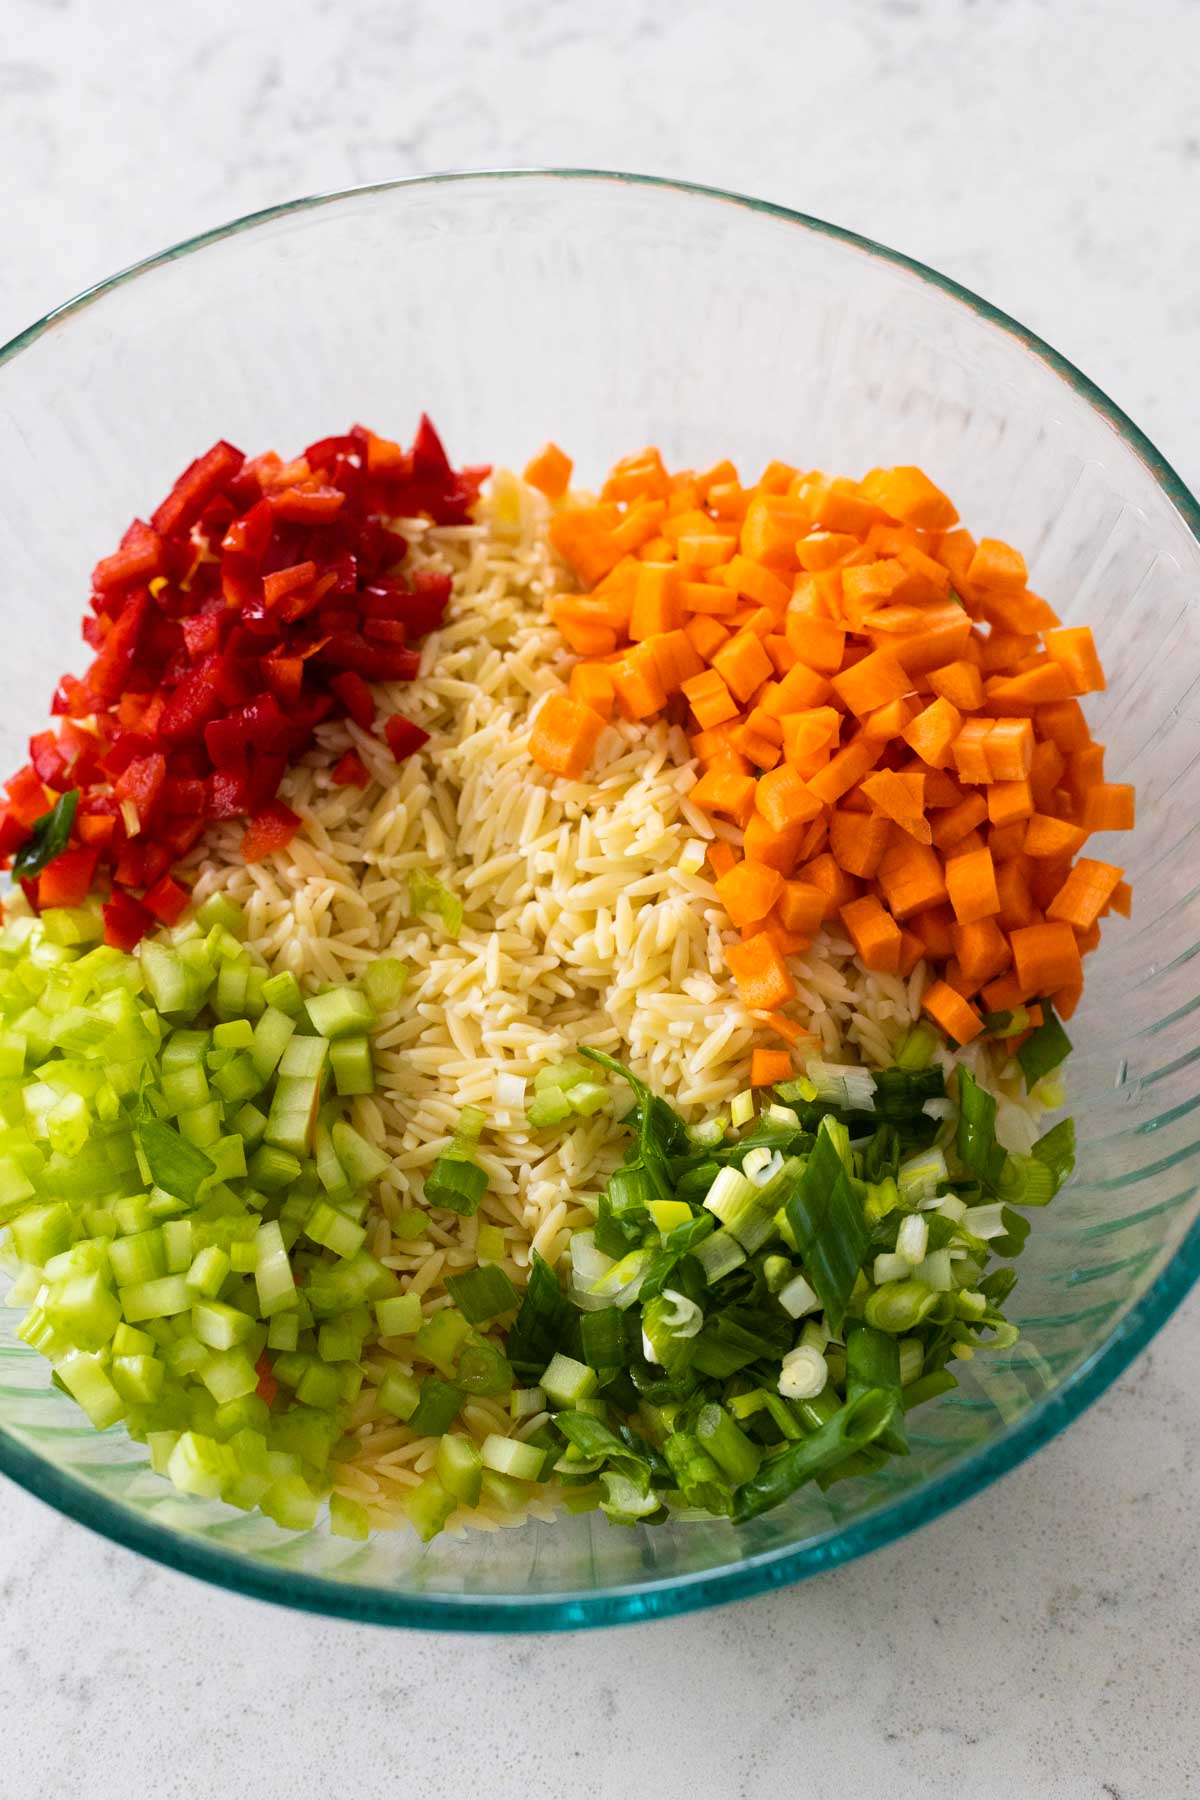 The mixing bowl has the cooked orzo pasta topped with chopped carrots, celery, red pepper, and green onions.